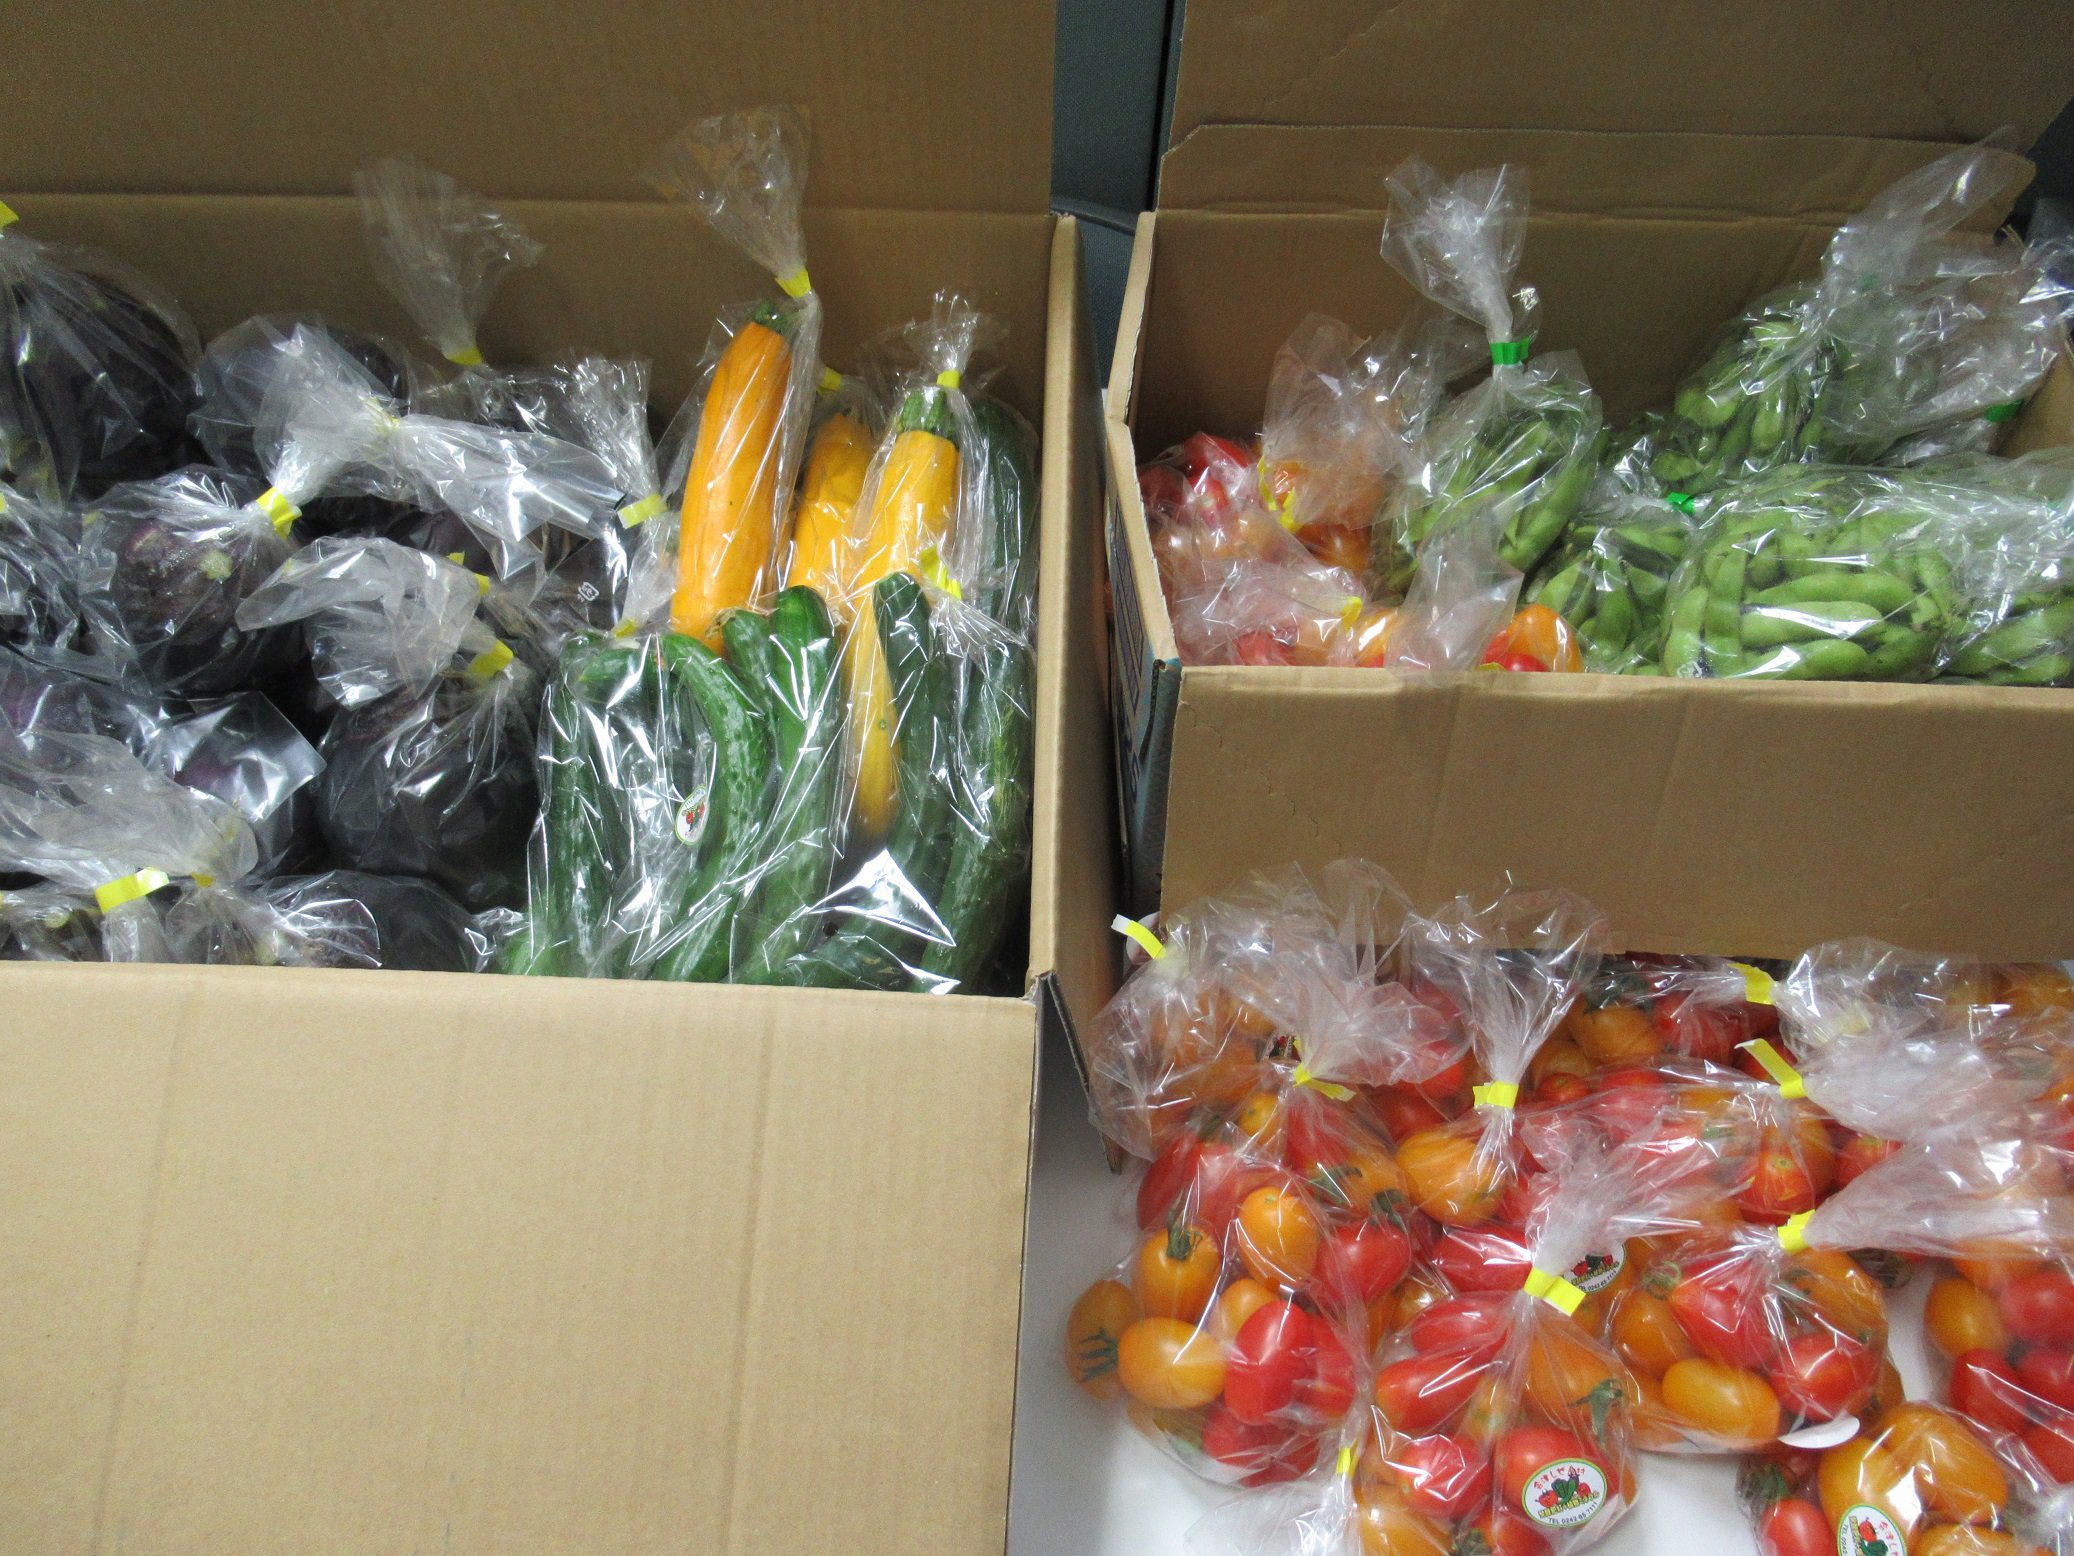 MS. Takahashi donated vegetables (mini-tomato, cucumber, zucchini, eggplant and green soybeans)  to the international students